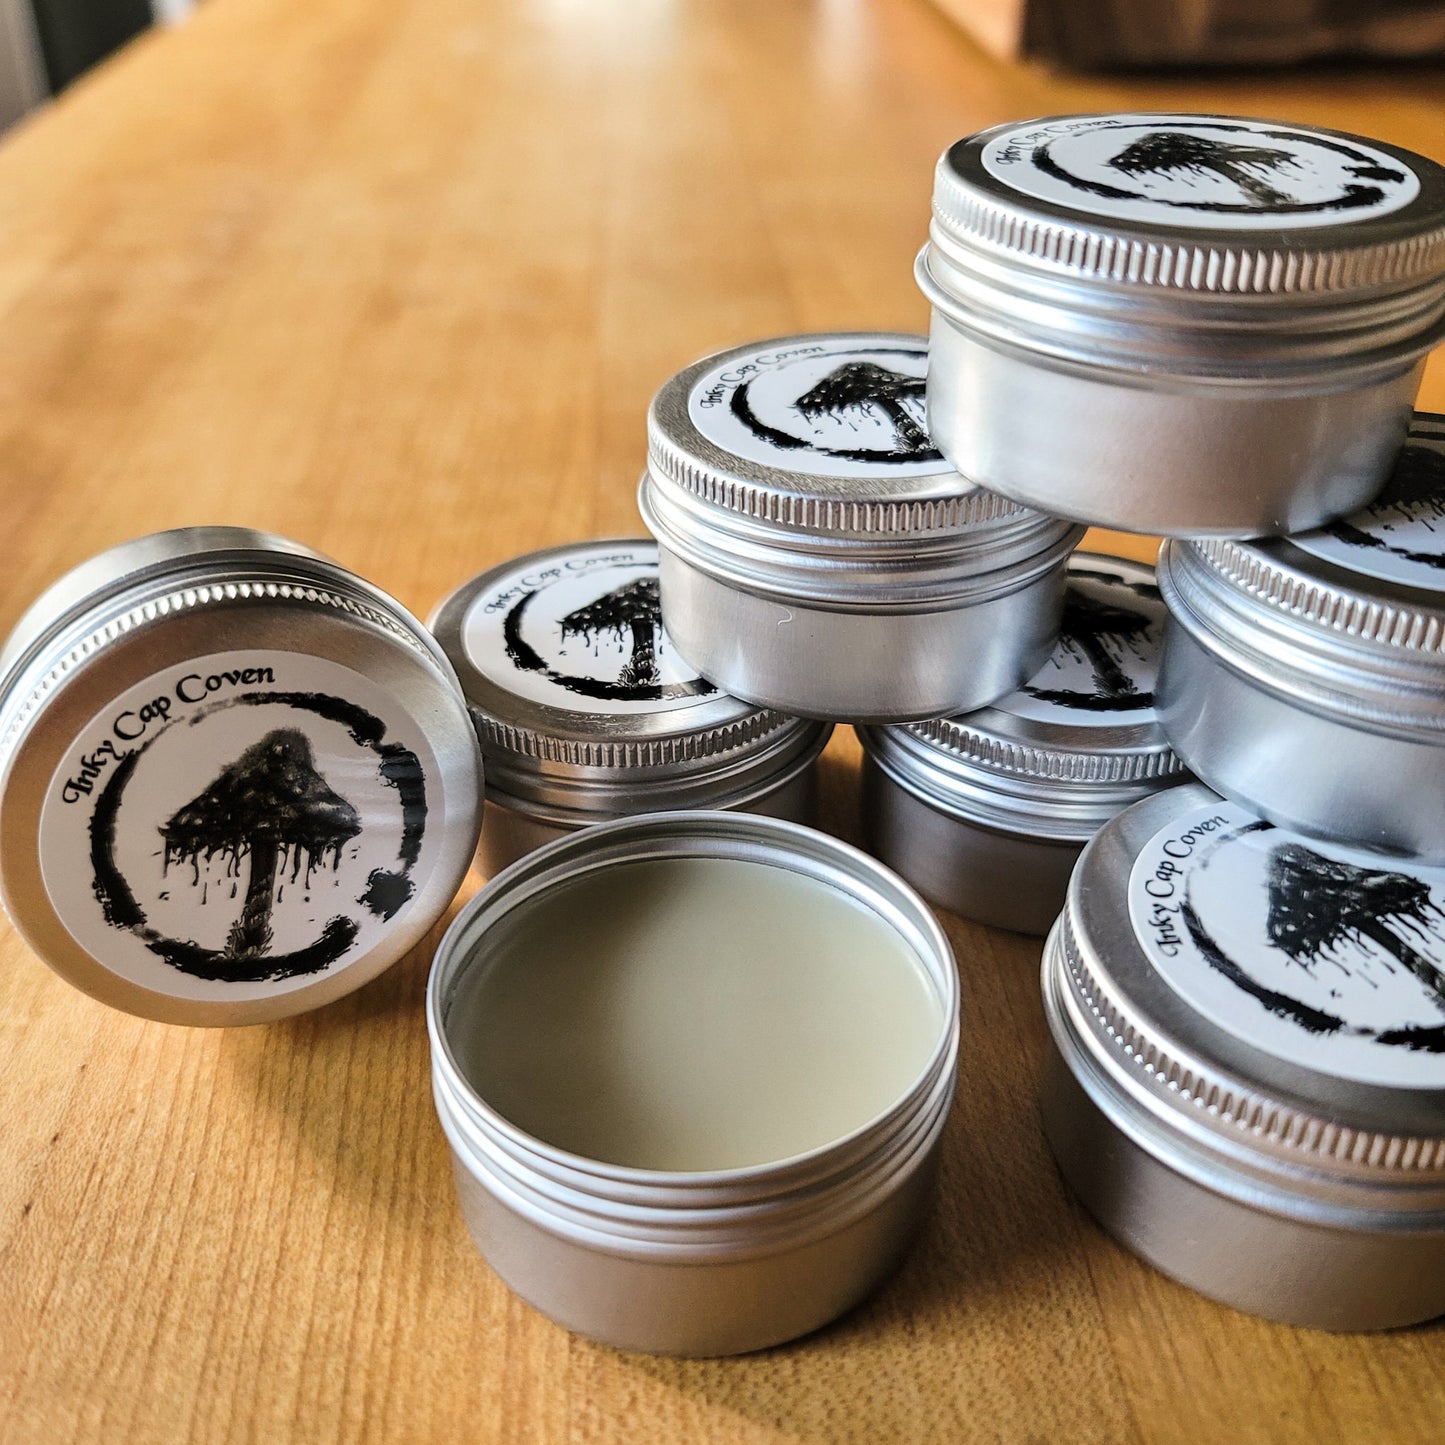 Regenerative Salve - Organic Rosehip Balm with Rose Essential Oil and Shea Butter